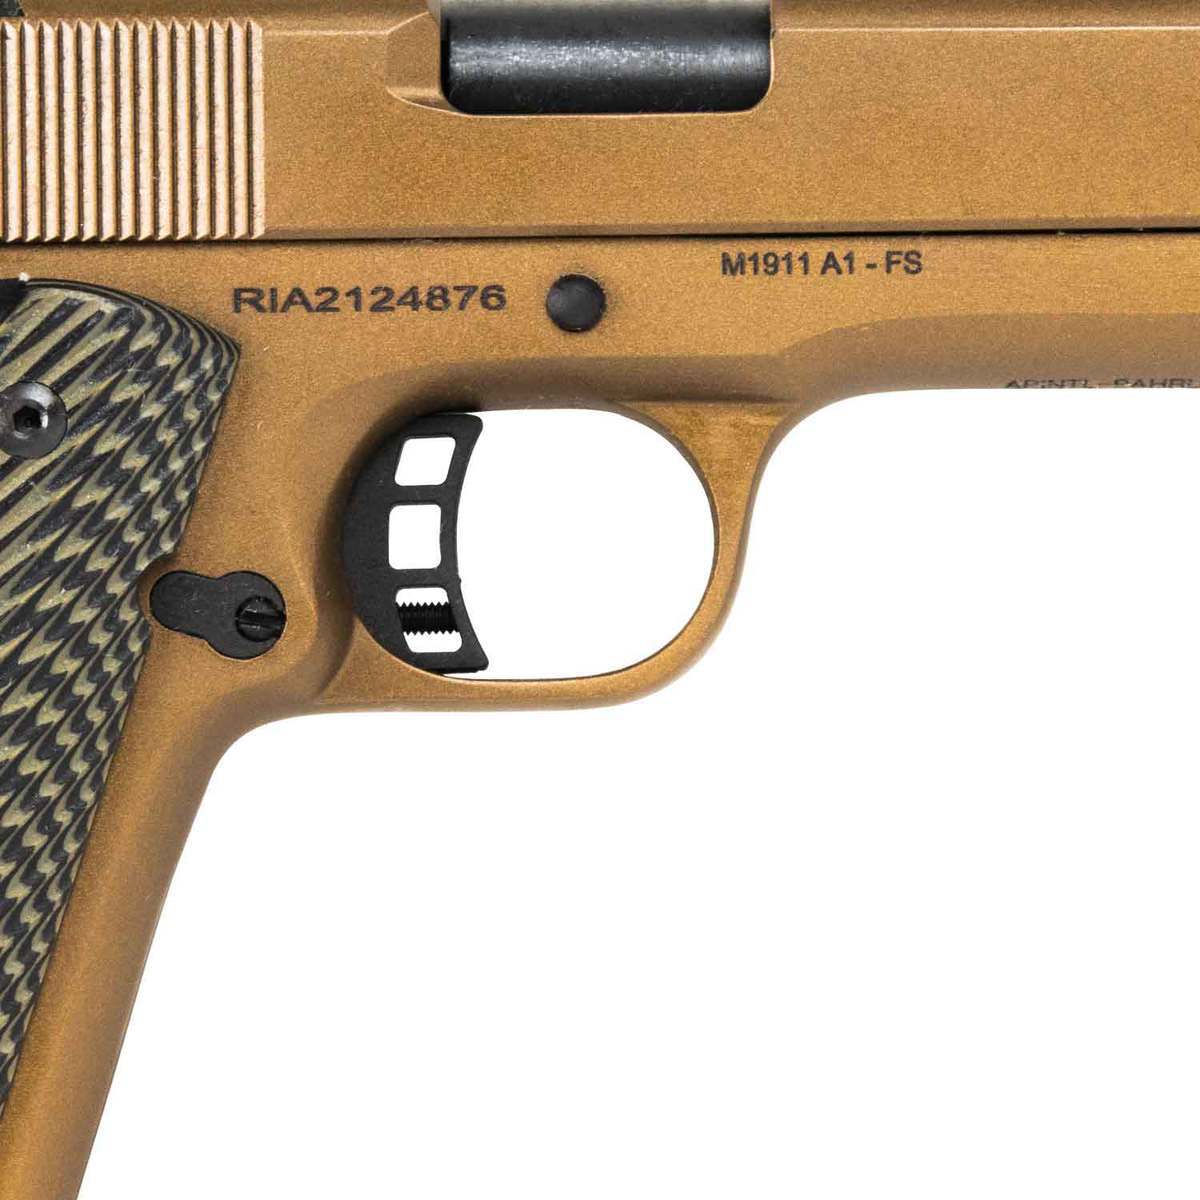 Rock Island Armory M1911 A1 Fs Tactical 45 Auto Acp 5in Burnt Bronzegreen Pistol 81 Rounds 7641